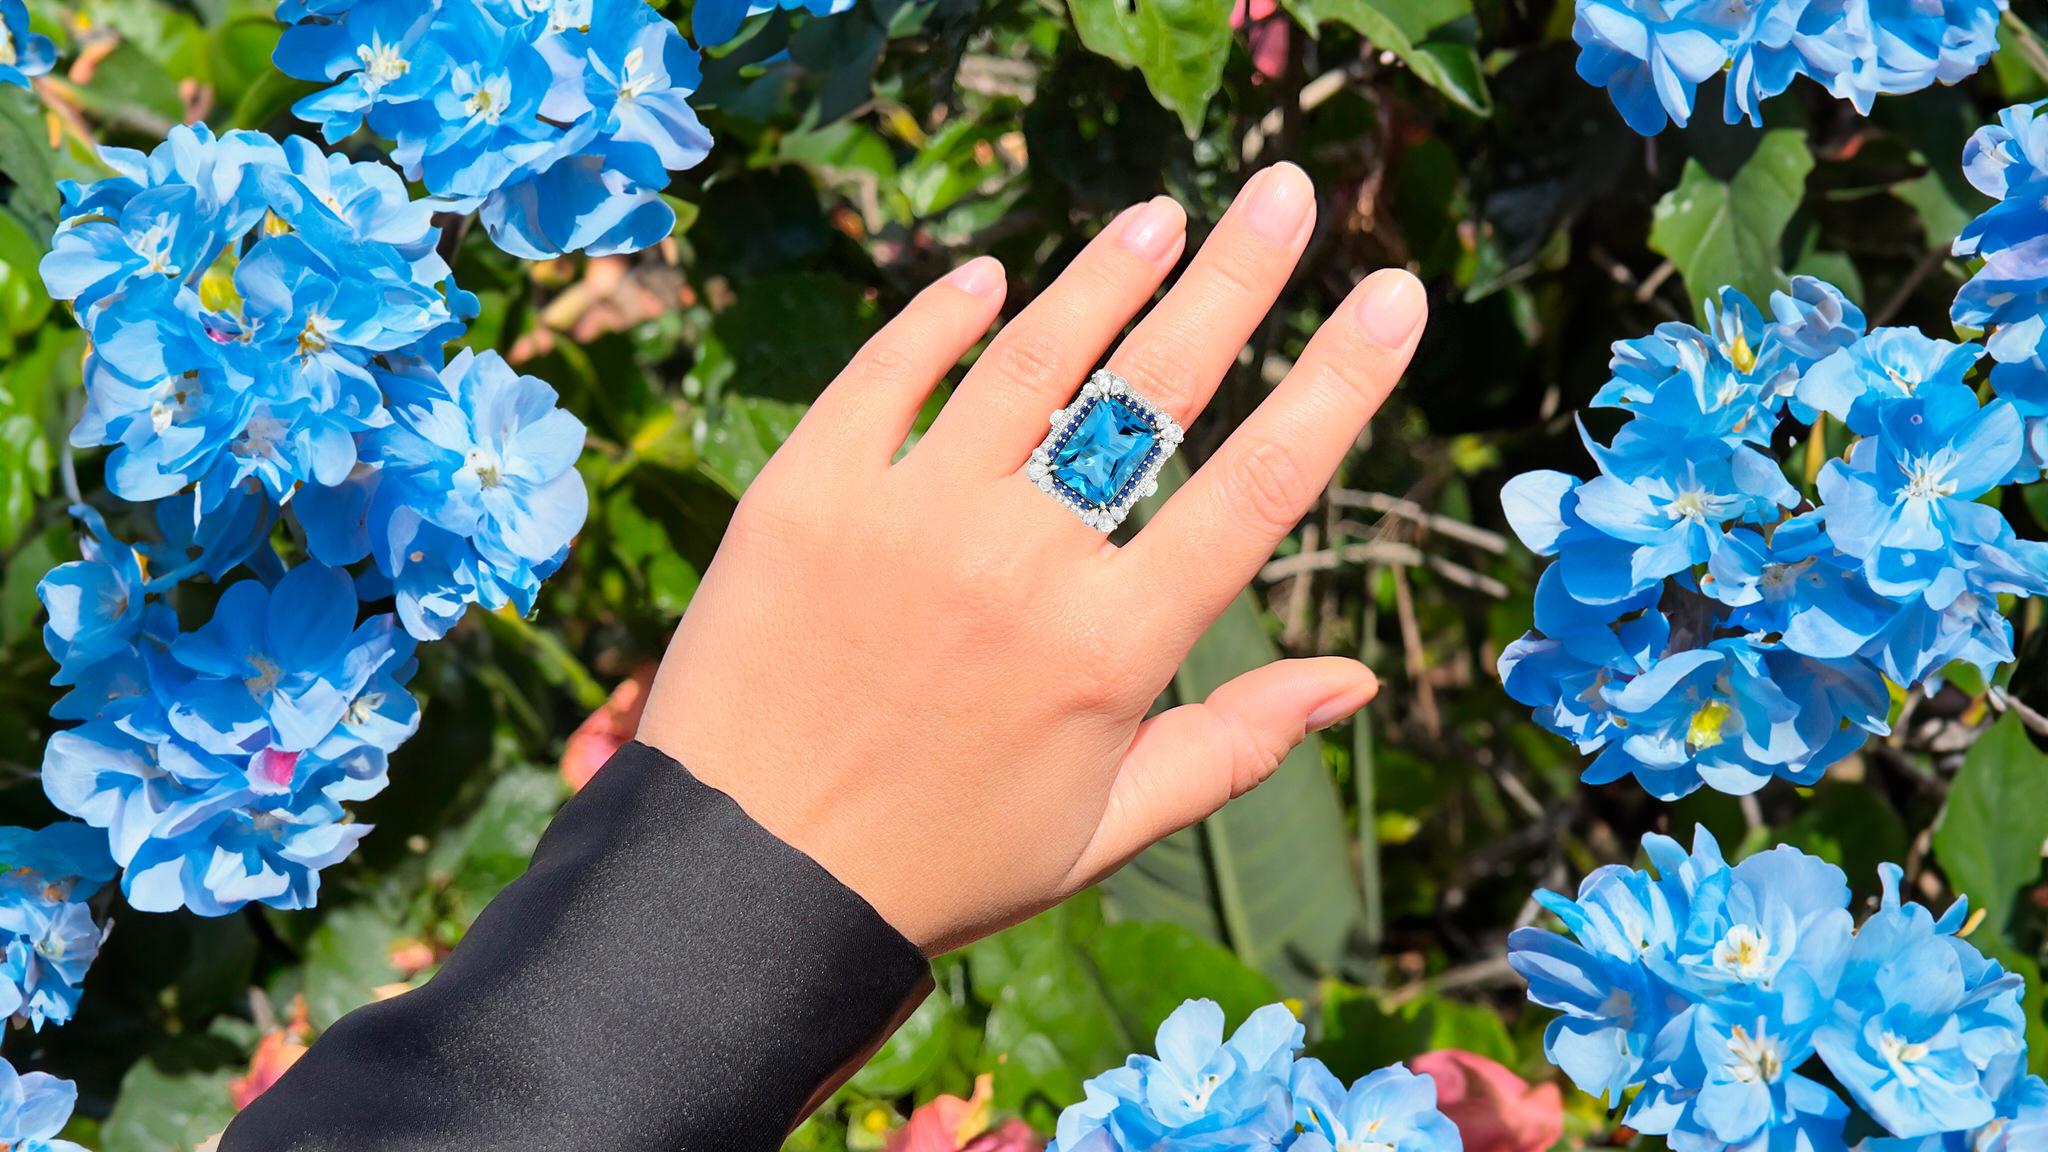 It comes with the Gemological Appraisal by GIA GG/AJP
All Gemstones are Natural
Blue Topaz = 10.97 Carat
Sapphires = 1.85 Carat
Diamonds = 0.32 Carats
Metal: 18K White Gold
Ring Size: 7* US
*It can be resized complimentary
